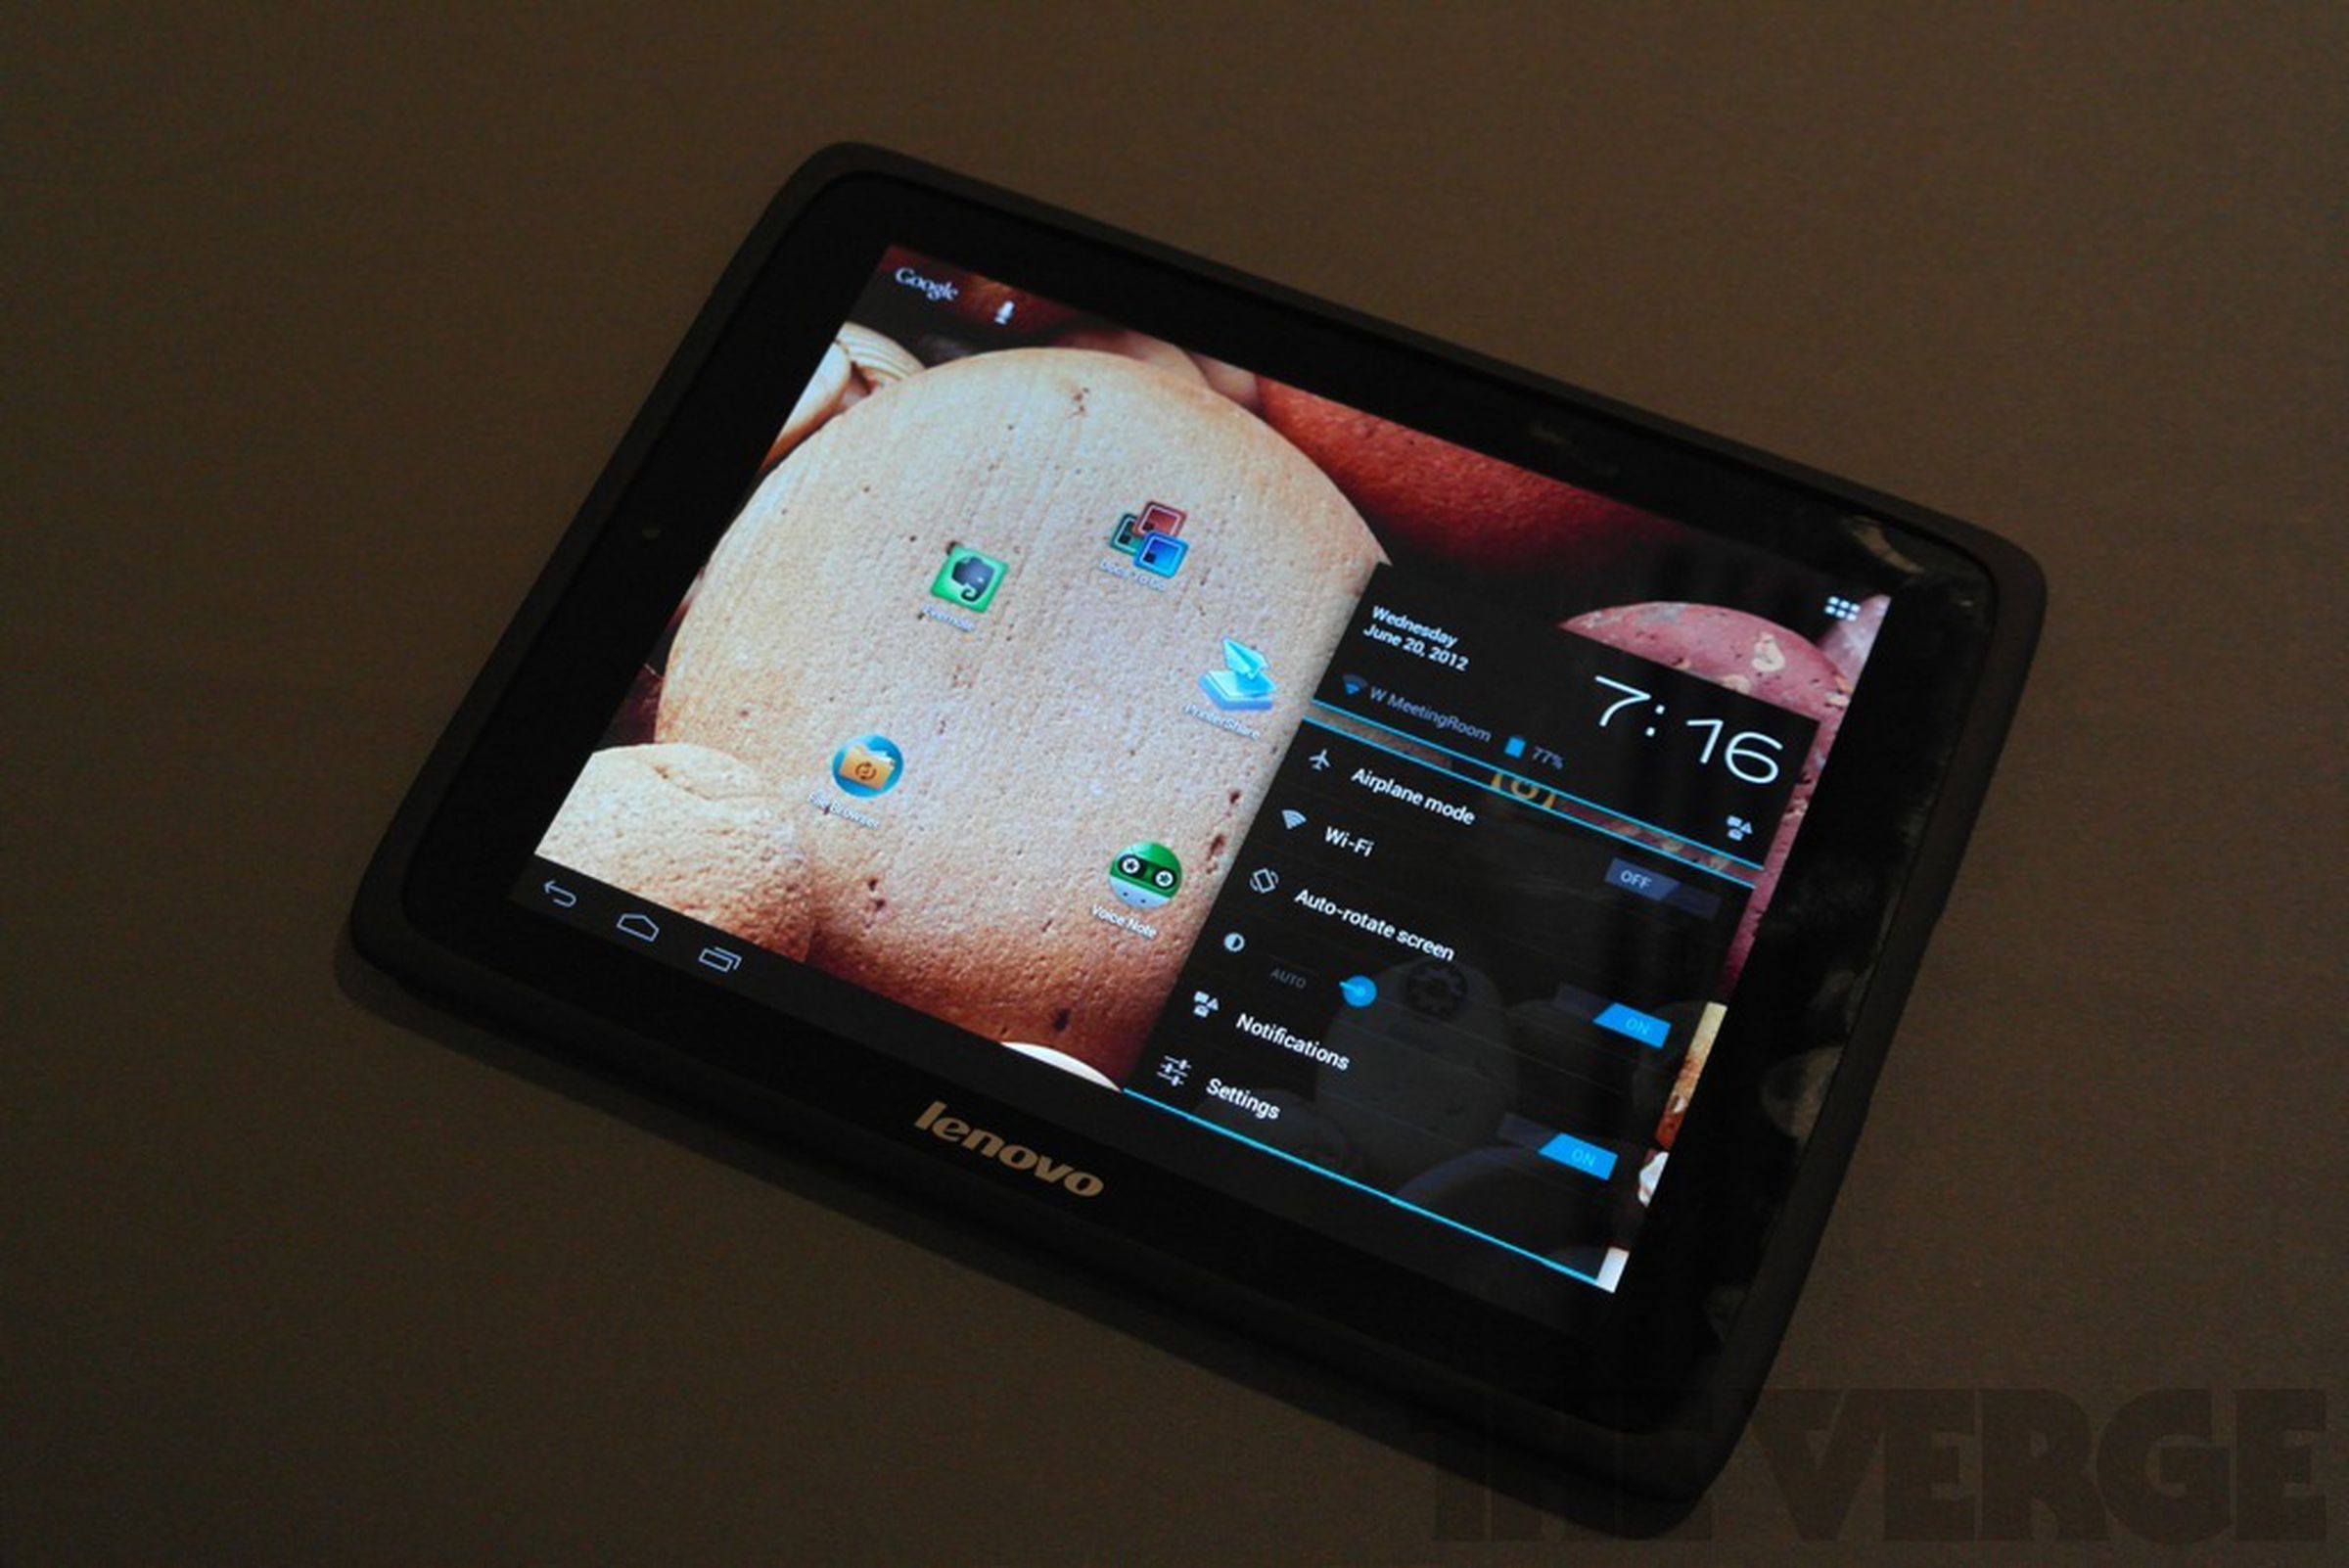 Lenovo IdeaTab S2109 hands-on pictures